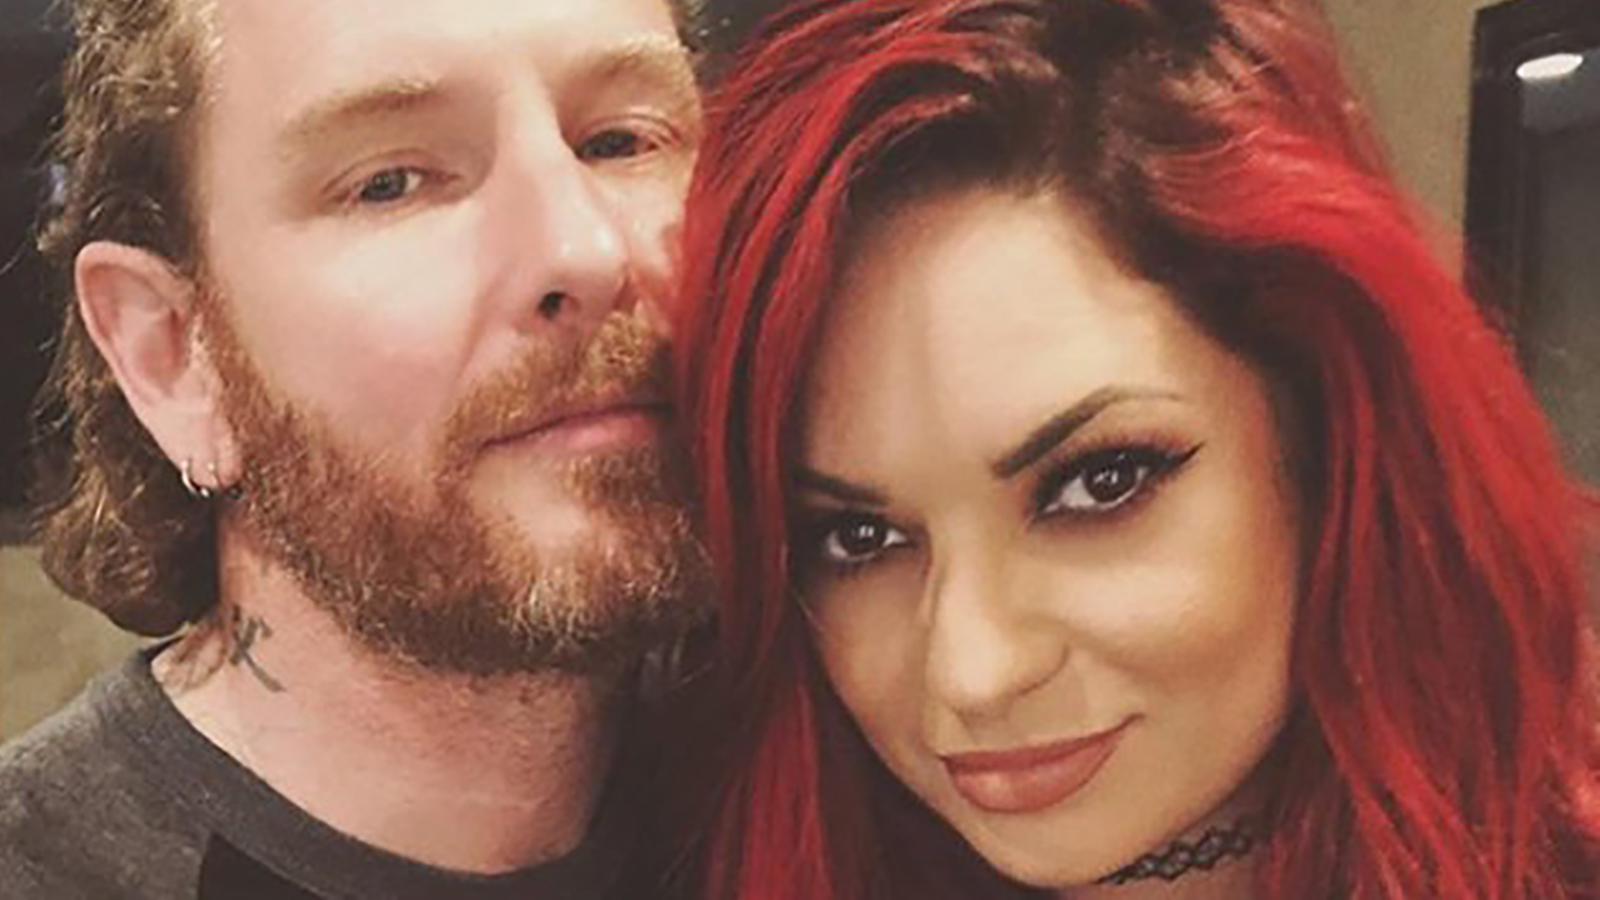 Corey Taylor and Alicia Dove Get Married in Elvis-Led Vegas Ceremony